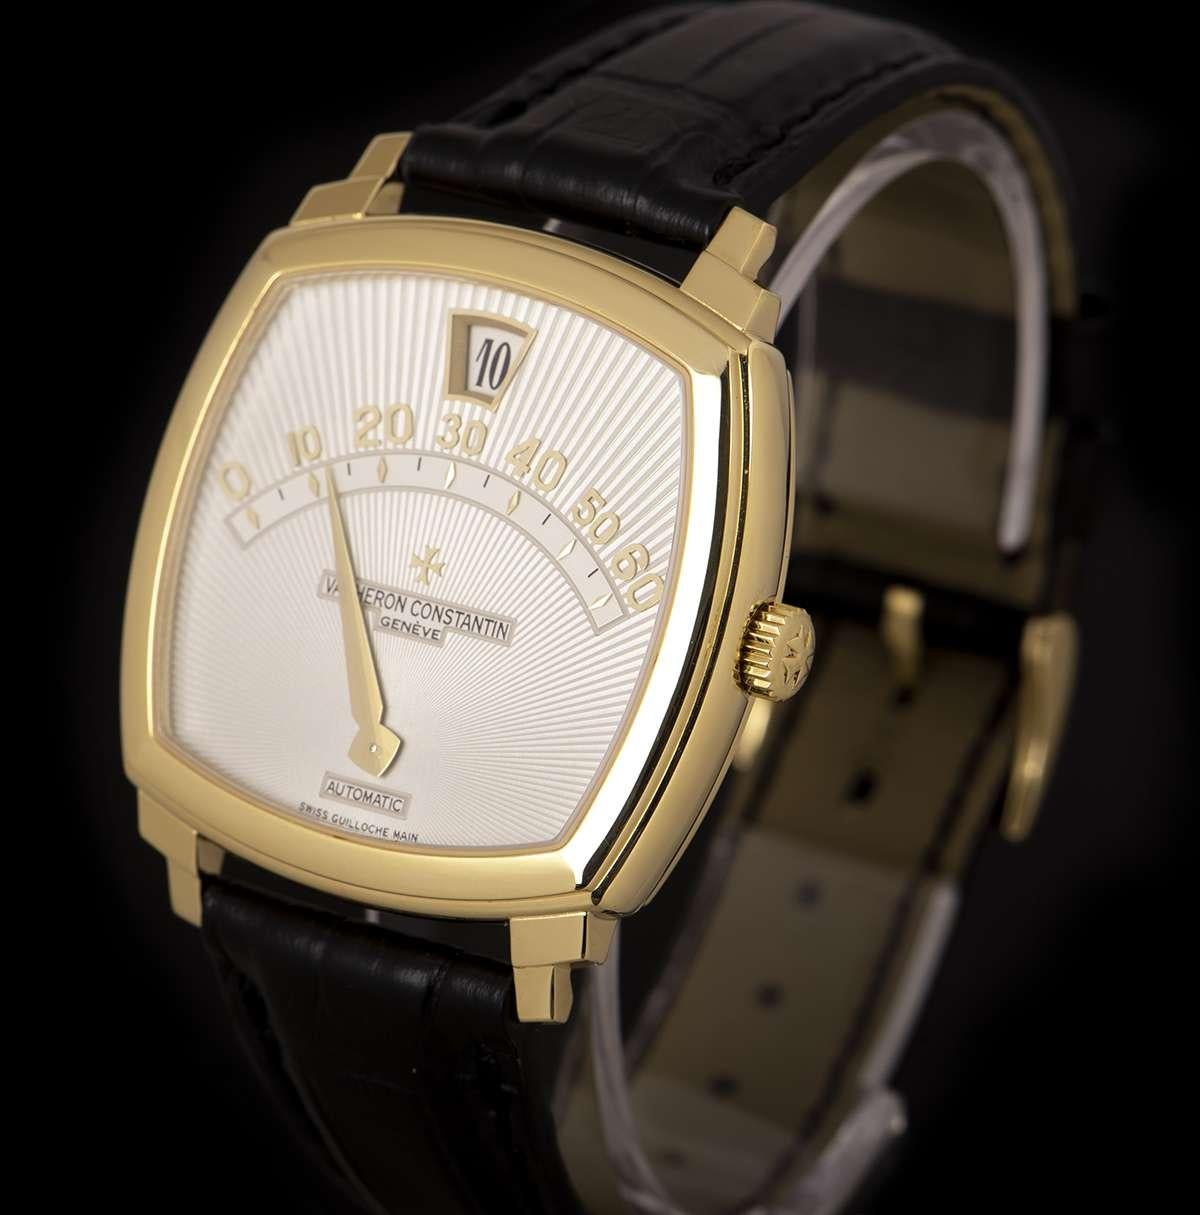 A Limited Edition 18k Yellow Gold Saltarello Retrograde 43041/000J-8673 Gents Wristwatch, silvered guilloche dial, fan-form sector for retrograde minutes with applied arabic numbers, hour aperture at 12 0'clock, a fixed 18k yellow gold bezel, an